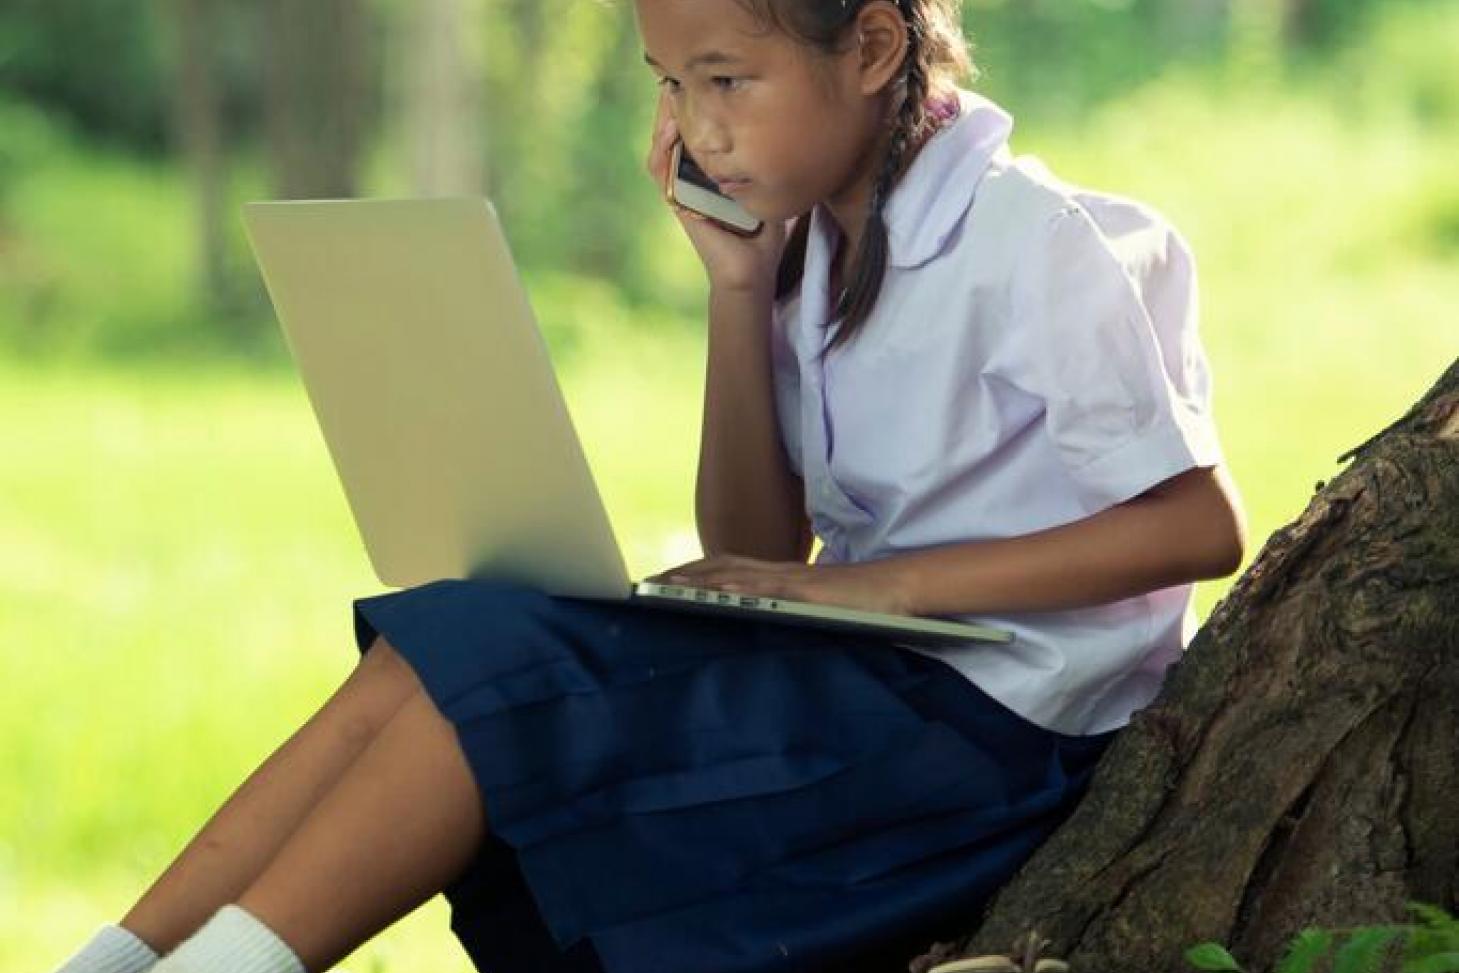 Girl sitting at the base of a tree on a laptop talking on the phone.